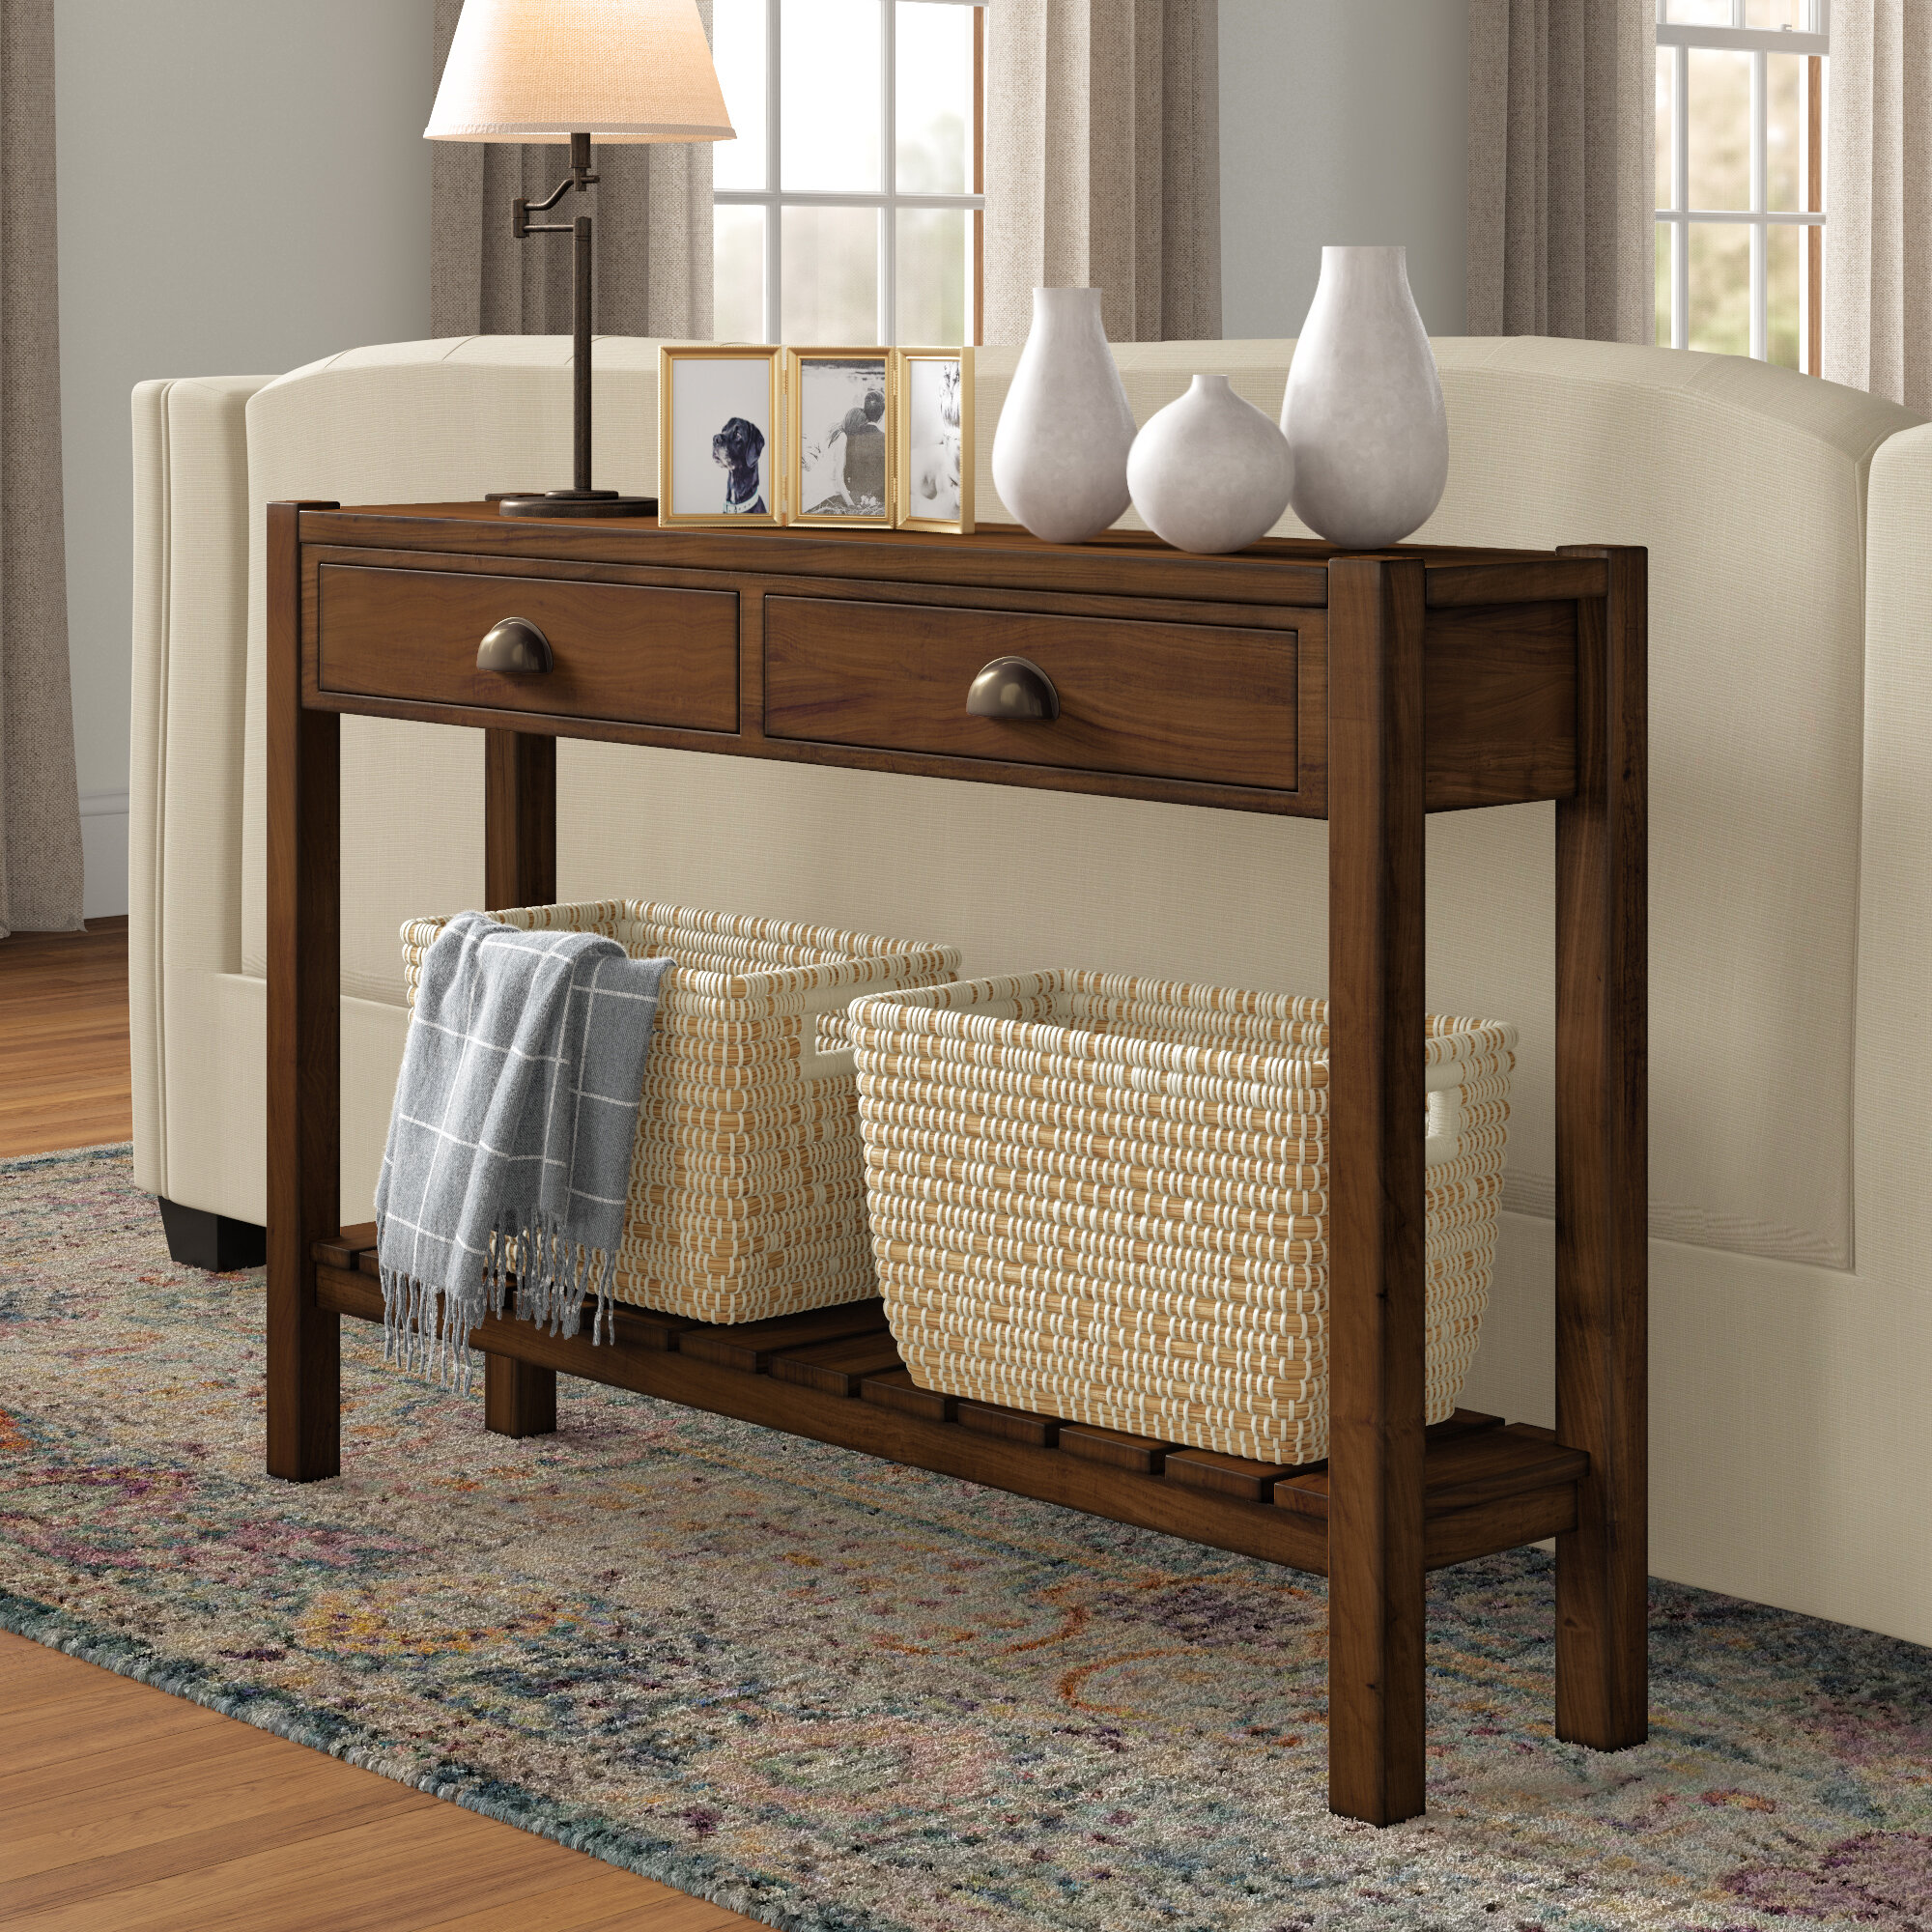 Small Hall Stand Accent Console Table Narrow Entryway with Drawer Storage Shelf 